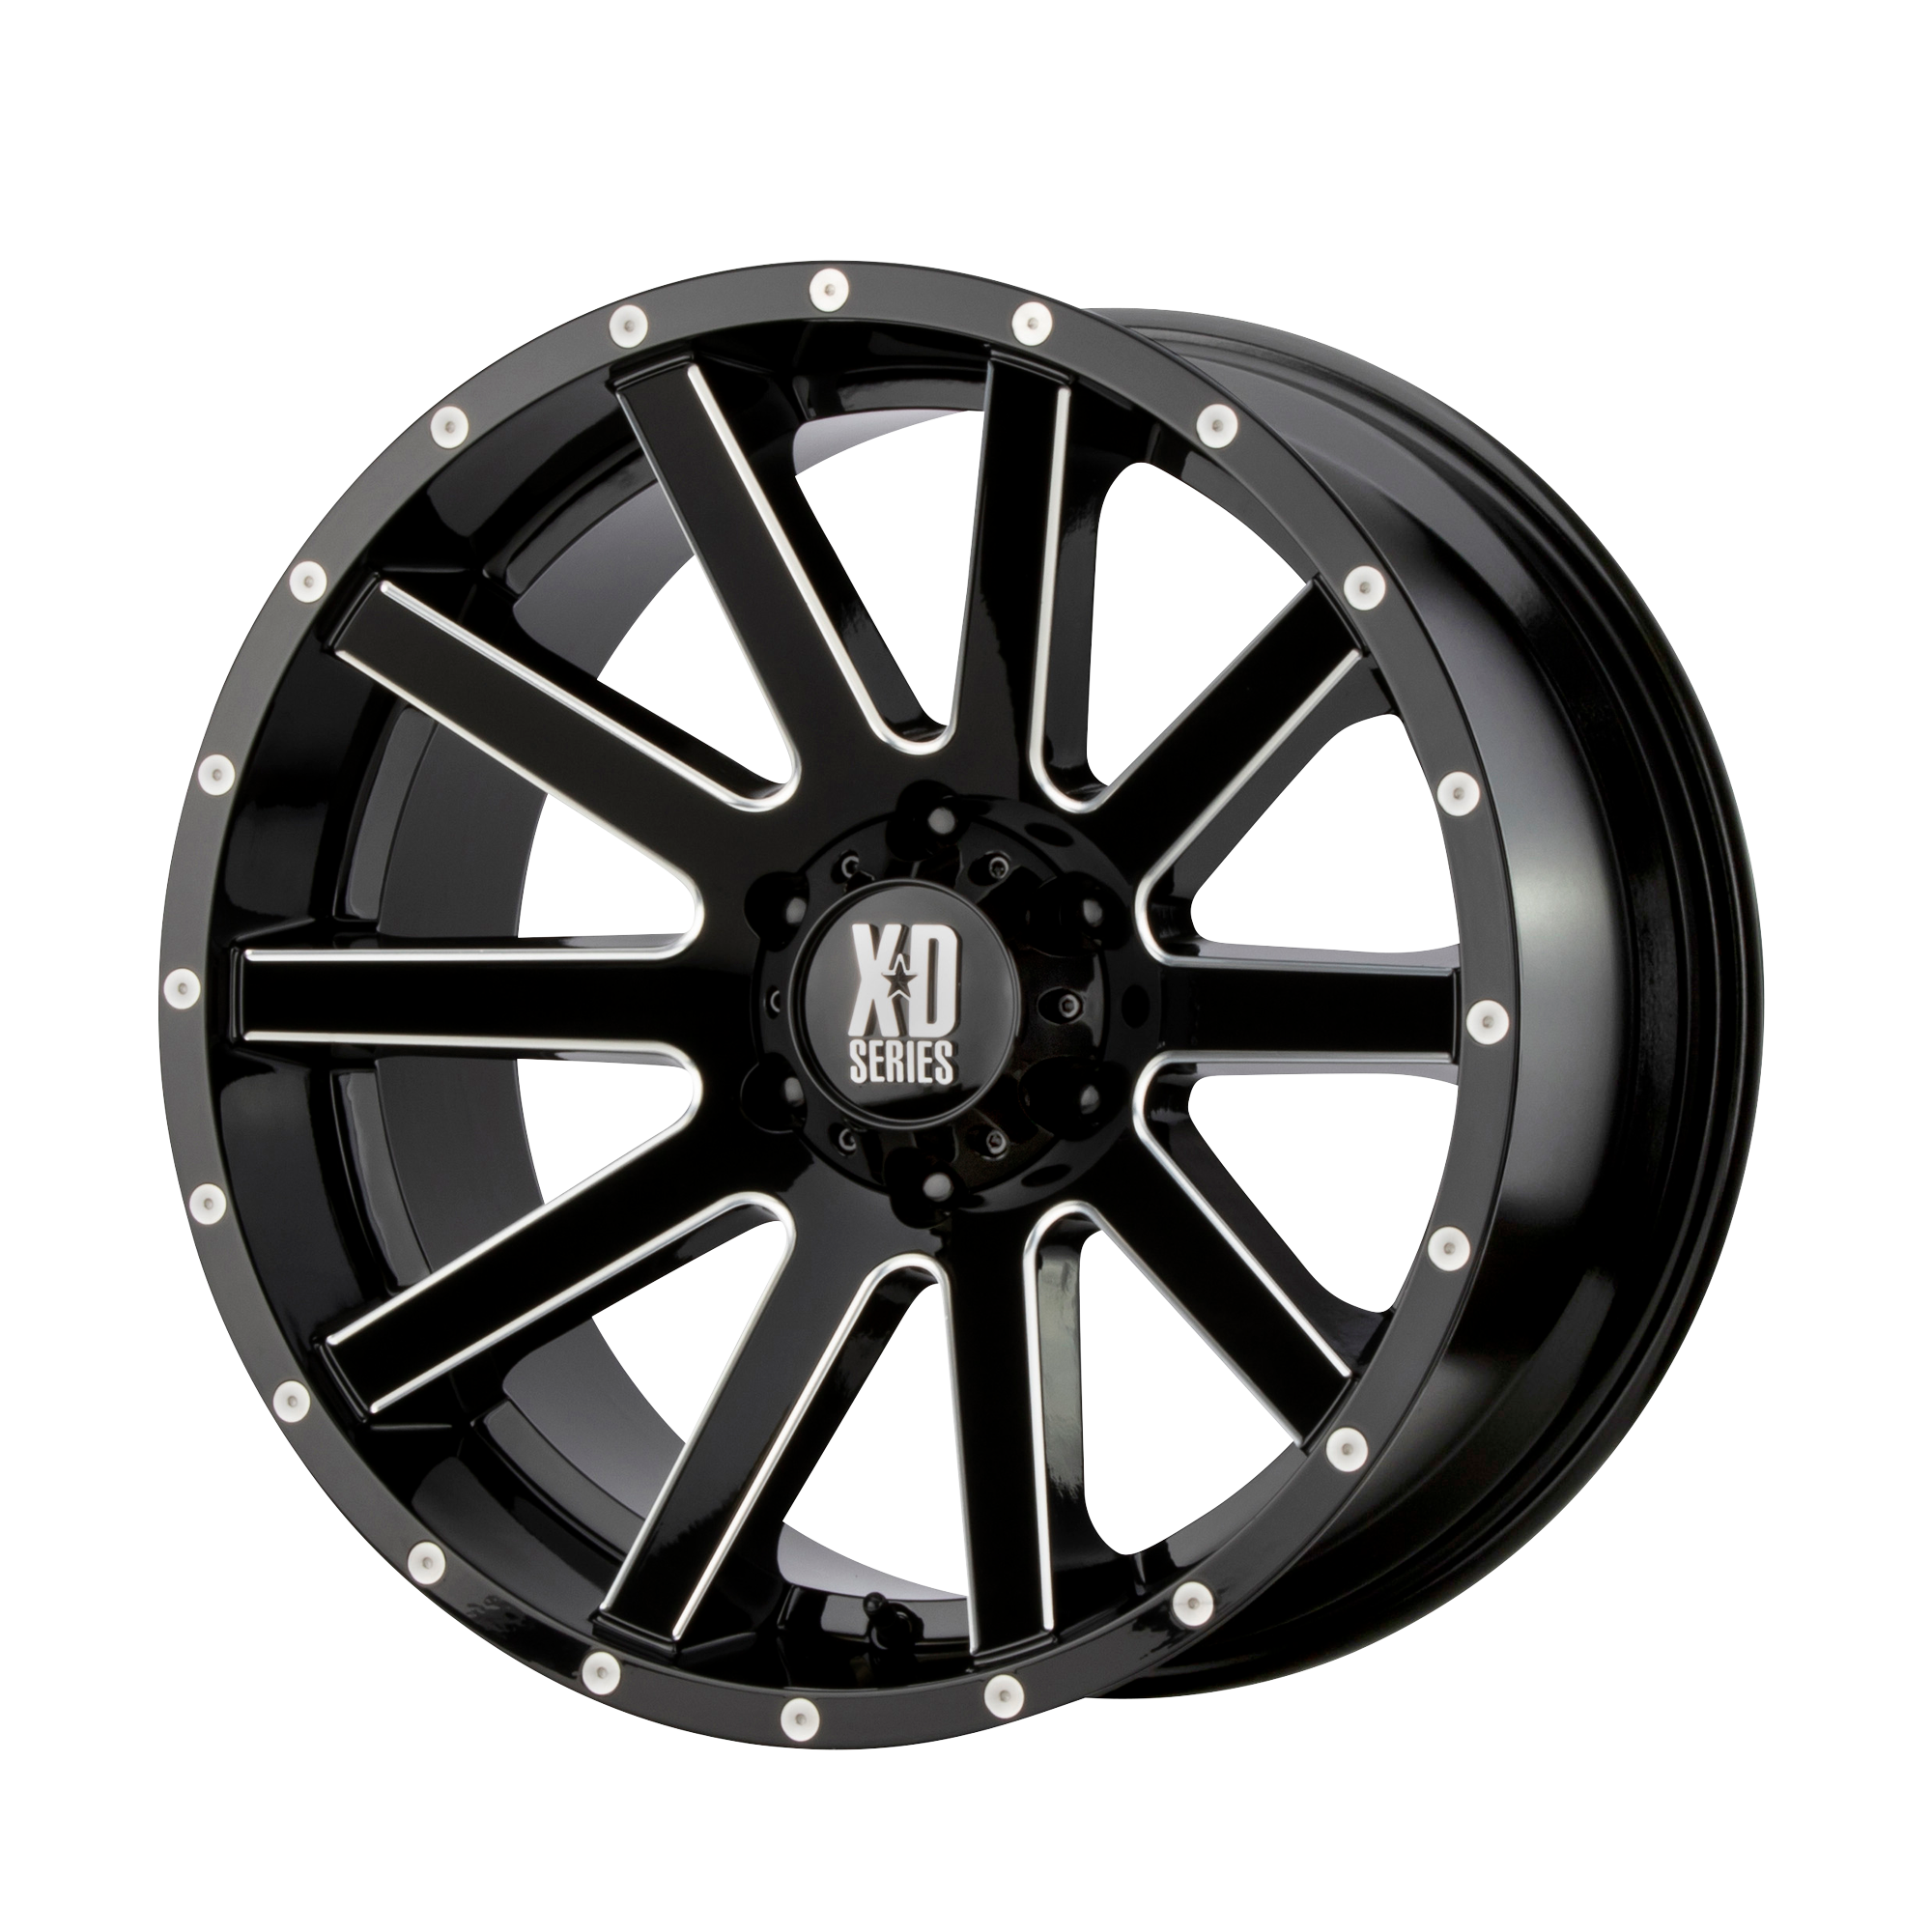 HEIST 17x9 6x139.70 GLOSS BLACK MILLED (30 mm) - Tires and Engine Performance